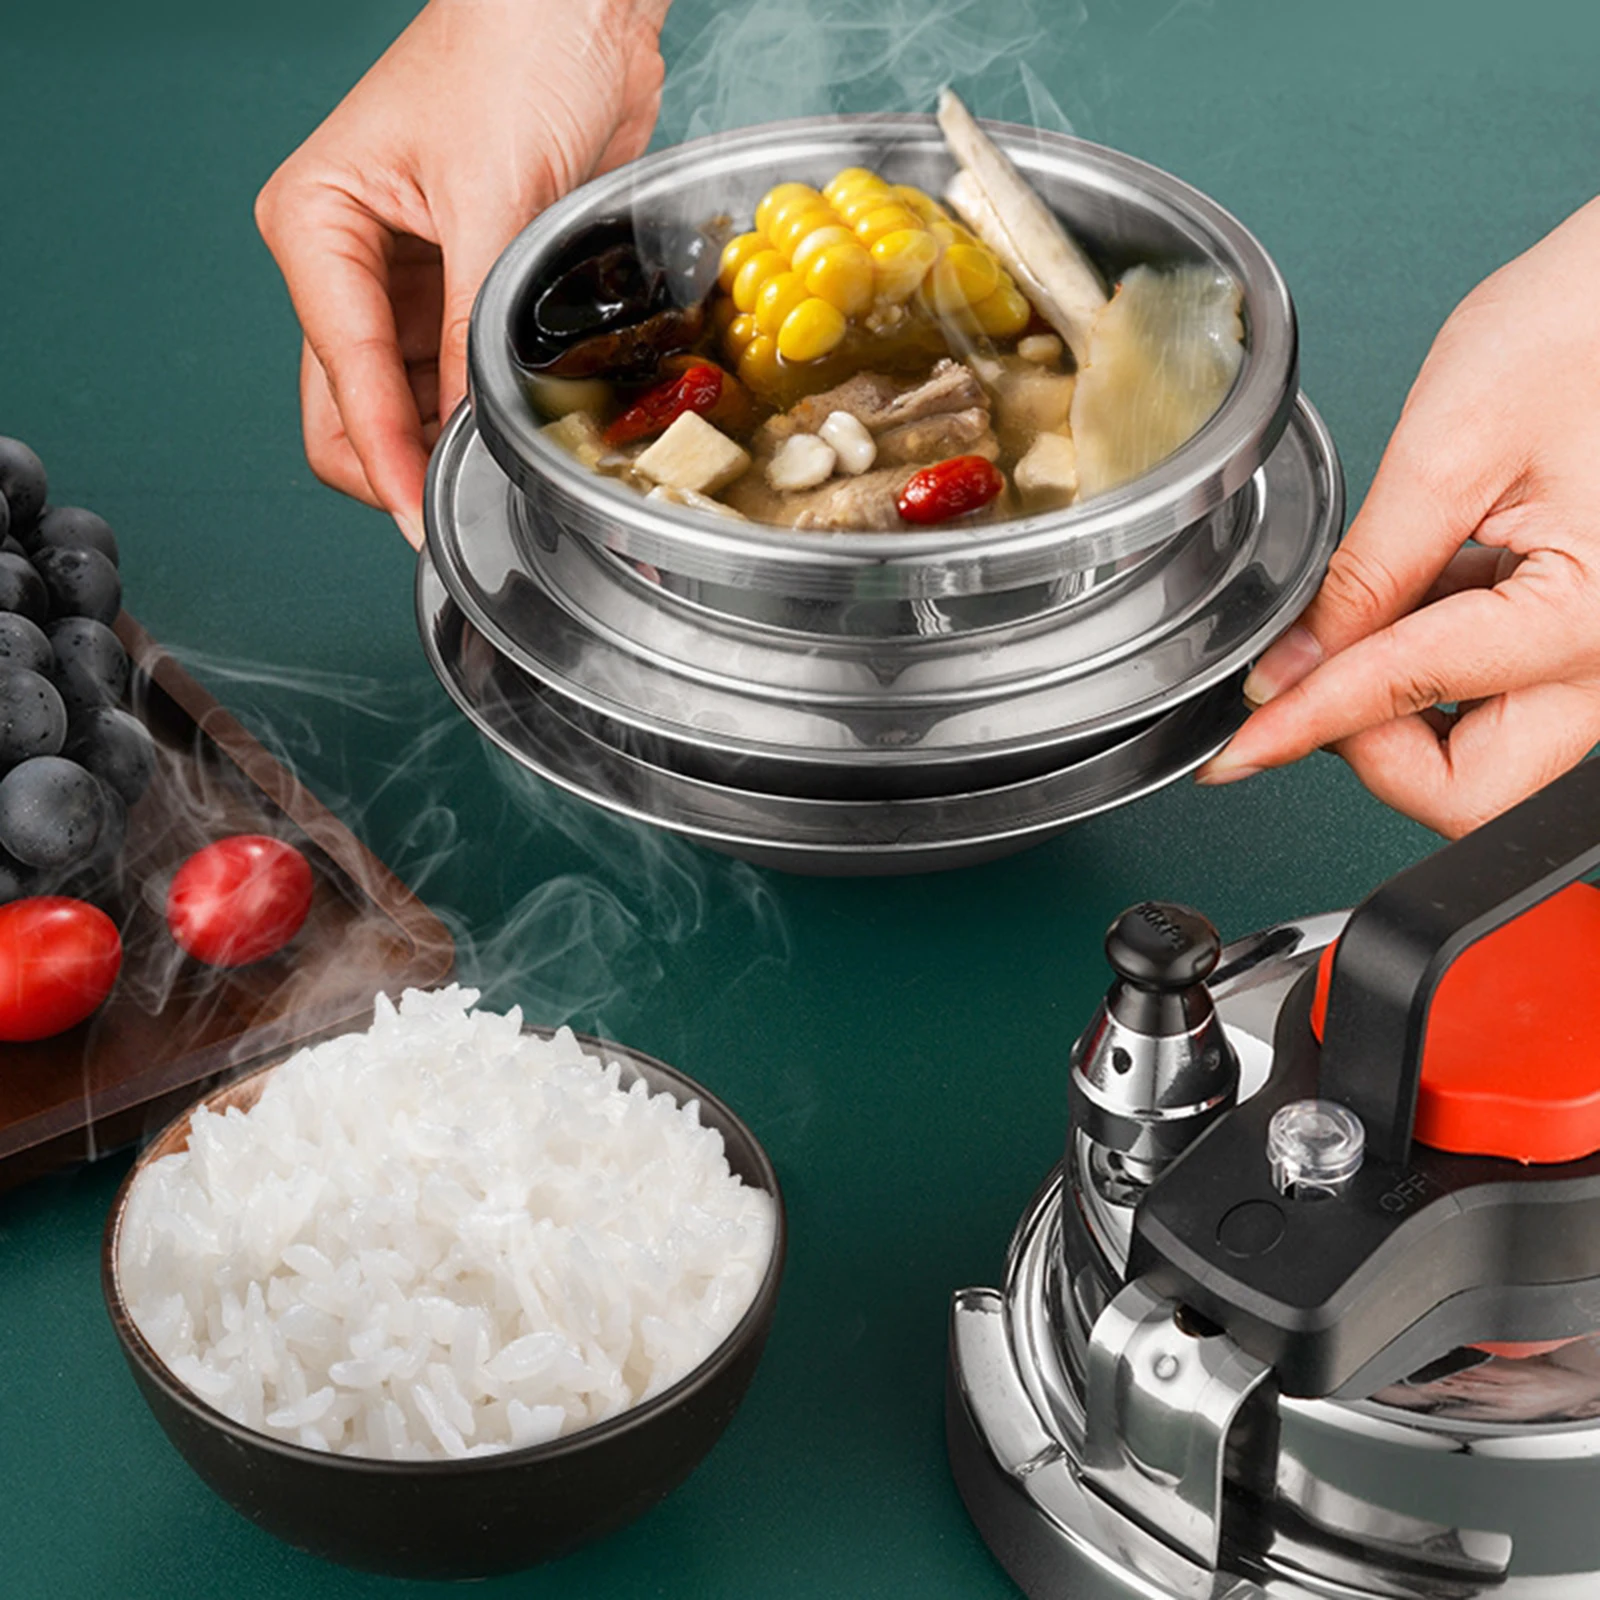 https://ae01.alicdn.com/kf/S21208f9853784fb9b74fd37399daf374A/304-Stainless-Steel-Mini-Pressure-Cooker-Camping-5-Minutes-Quickly-Cooking-Outdoor-Non-Stick-Cookware-Pot.jpg